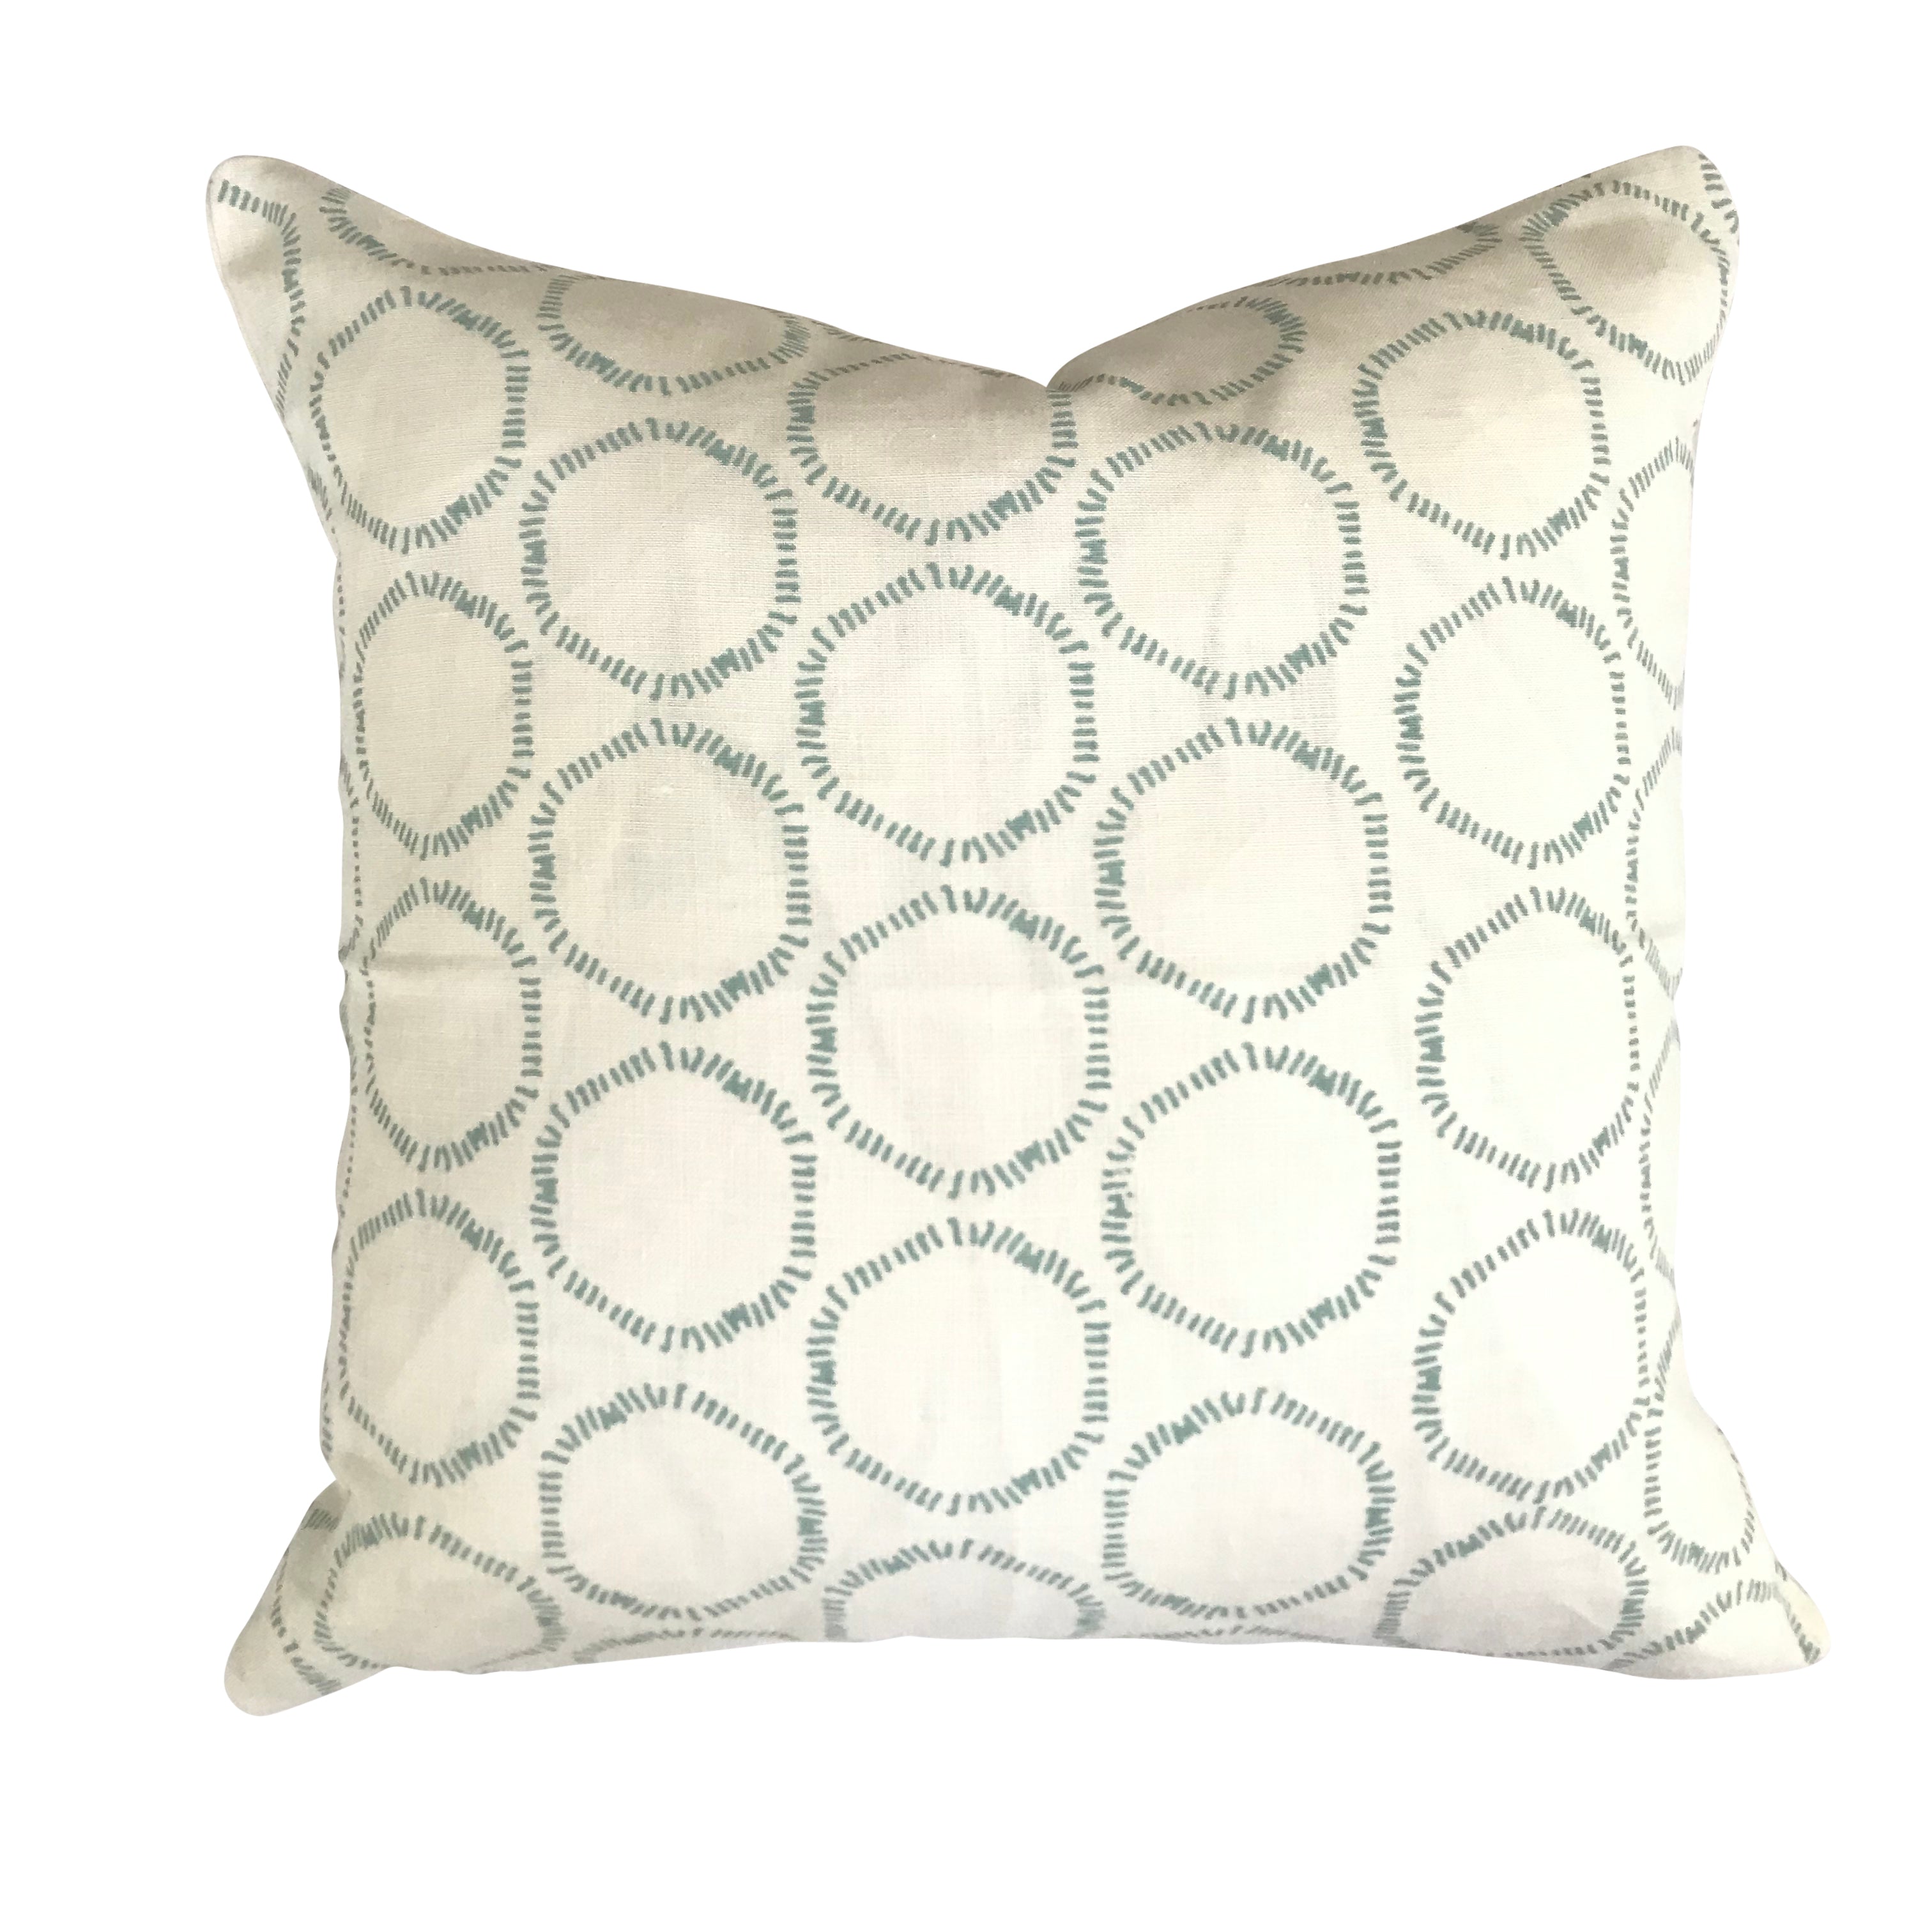 Cape pillow in Bluegrass on Oyster - greige design